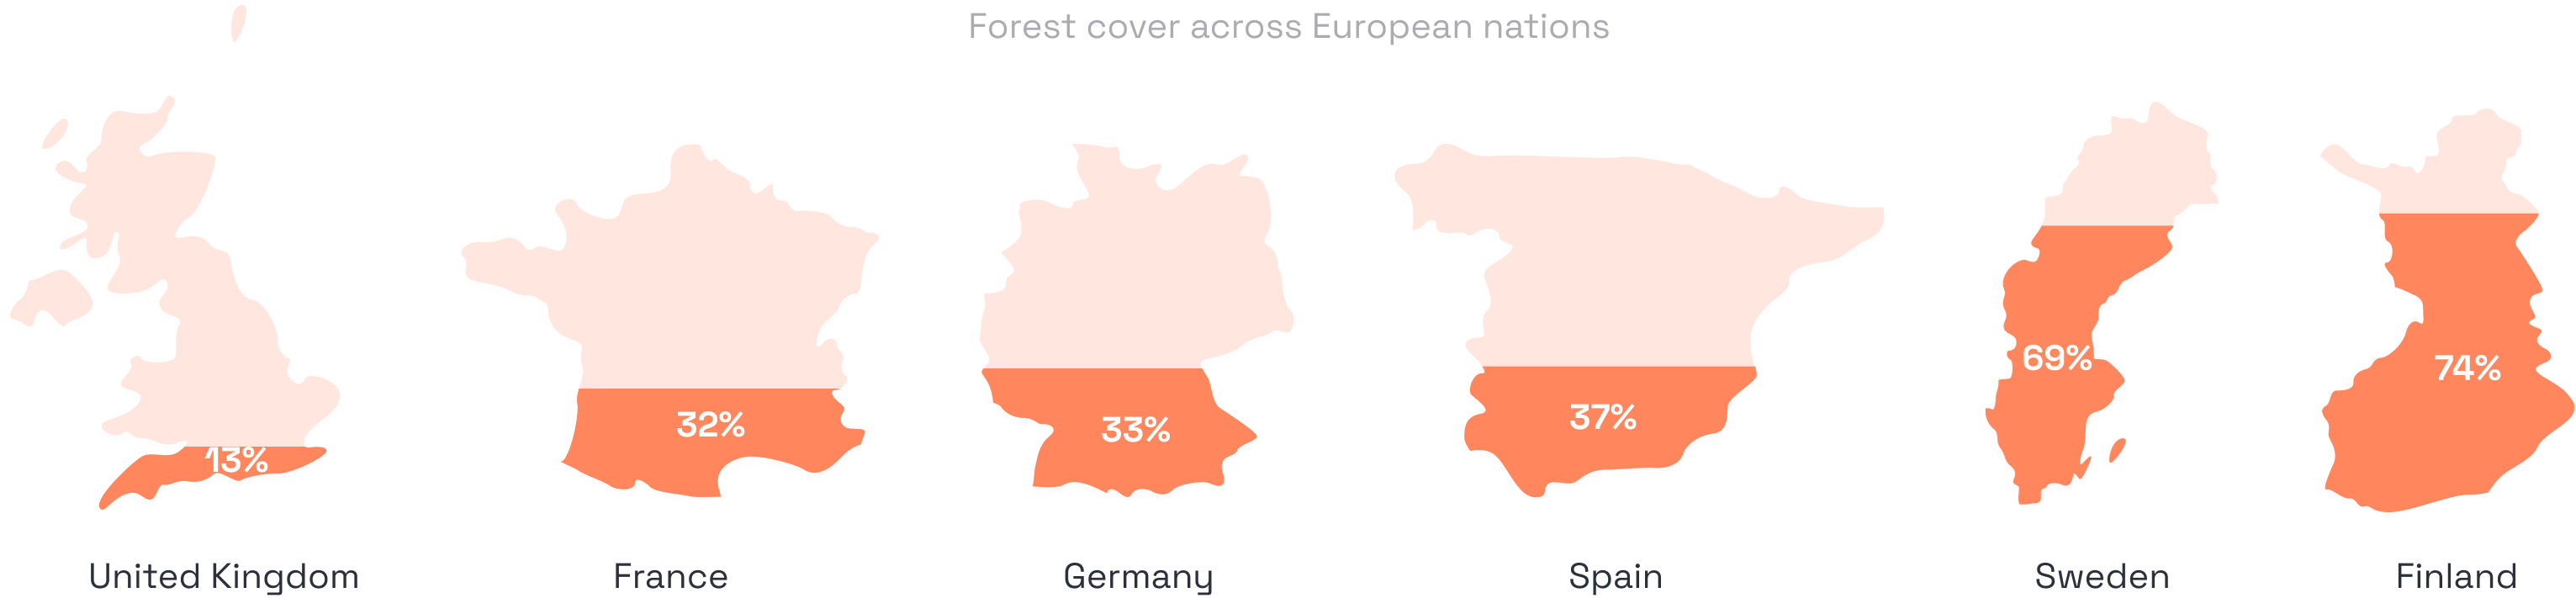 Diagram showing the forest coverage of different European nations